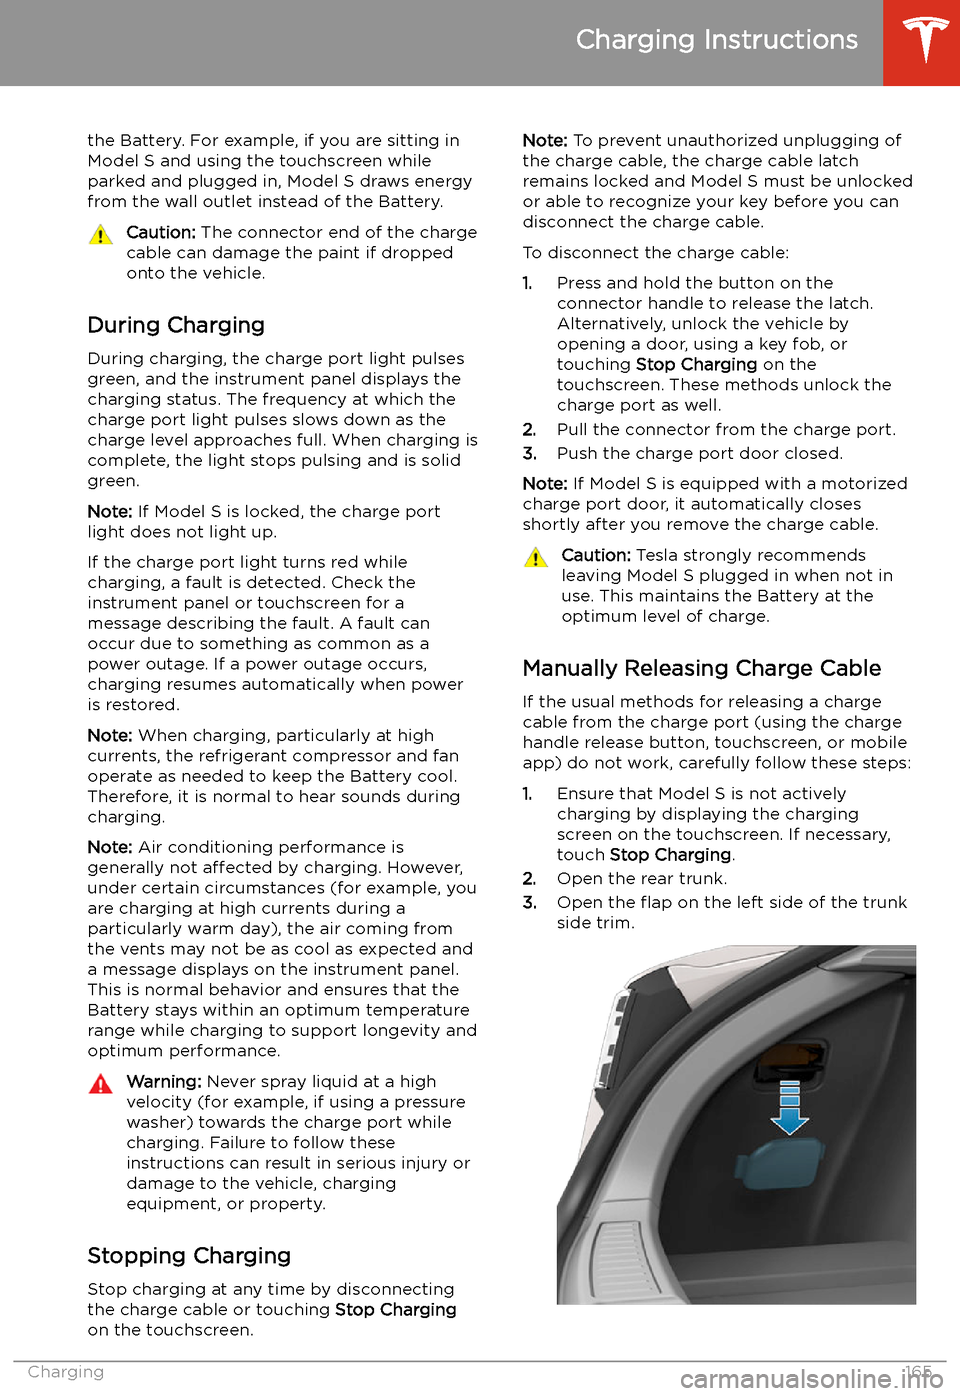 TESLA MODEL S 2020  Owners Manual the Battery. For example, if you are sitting in
Model S and using the touchscreen while
parked and plugged in, Model S draws energy
from the wall outlet instead of the Battery.Caution:  The connector 